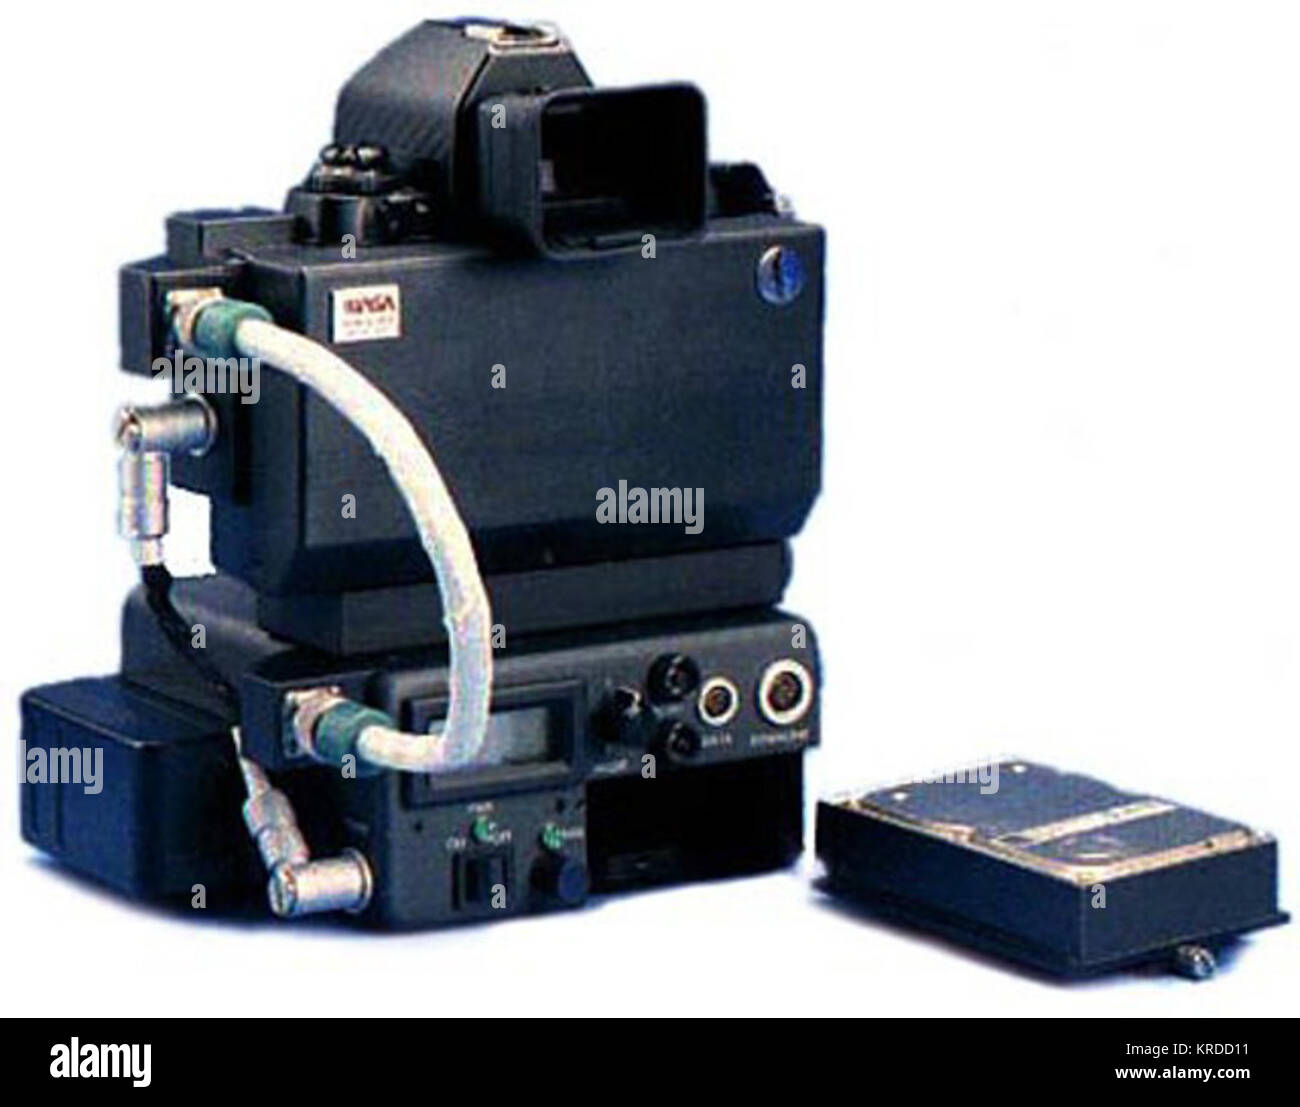 Nikon Nasa F4 back with cables and harddisk Stock Photo - Alamy